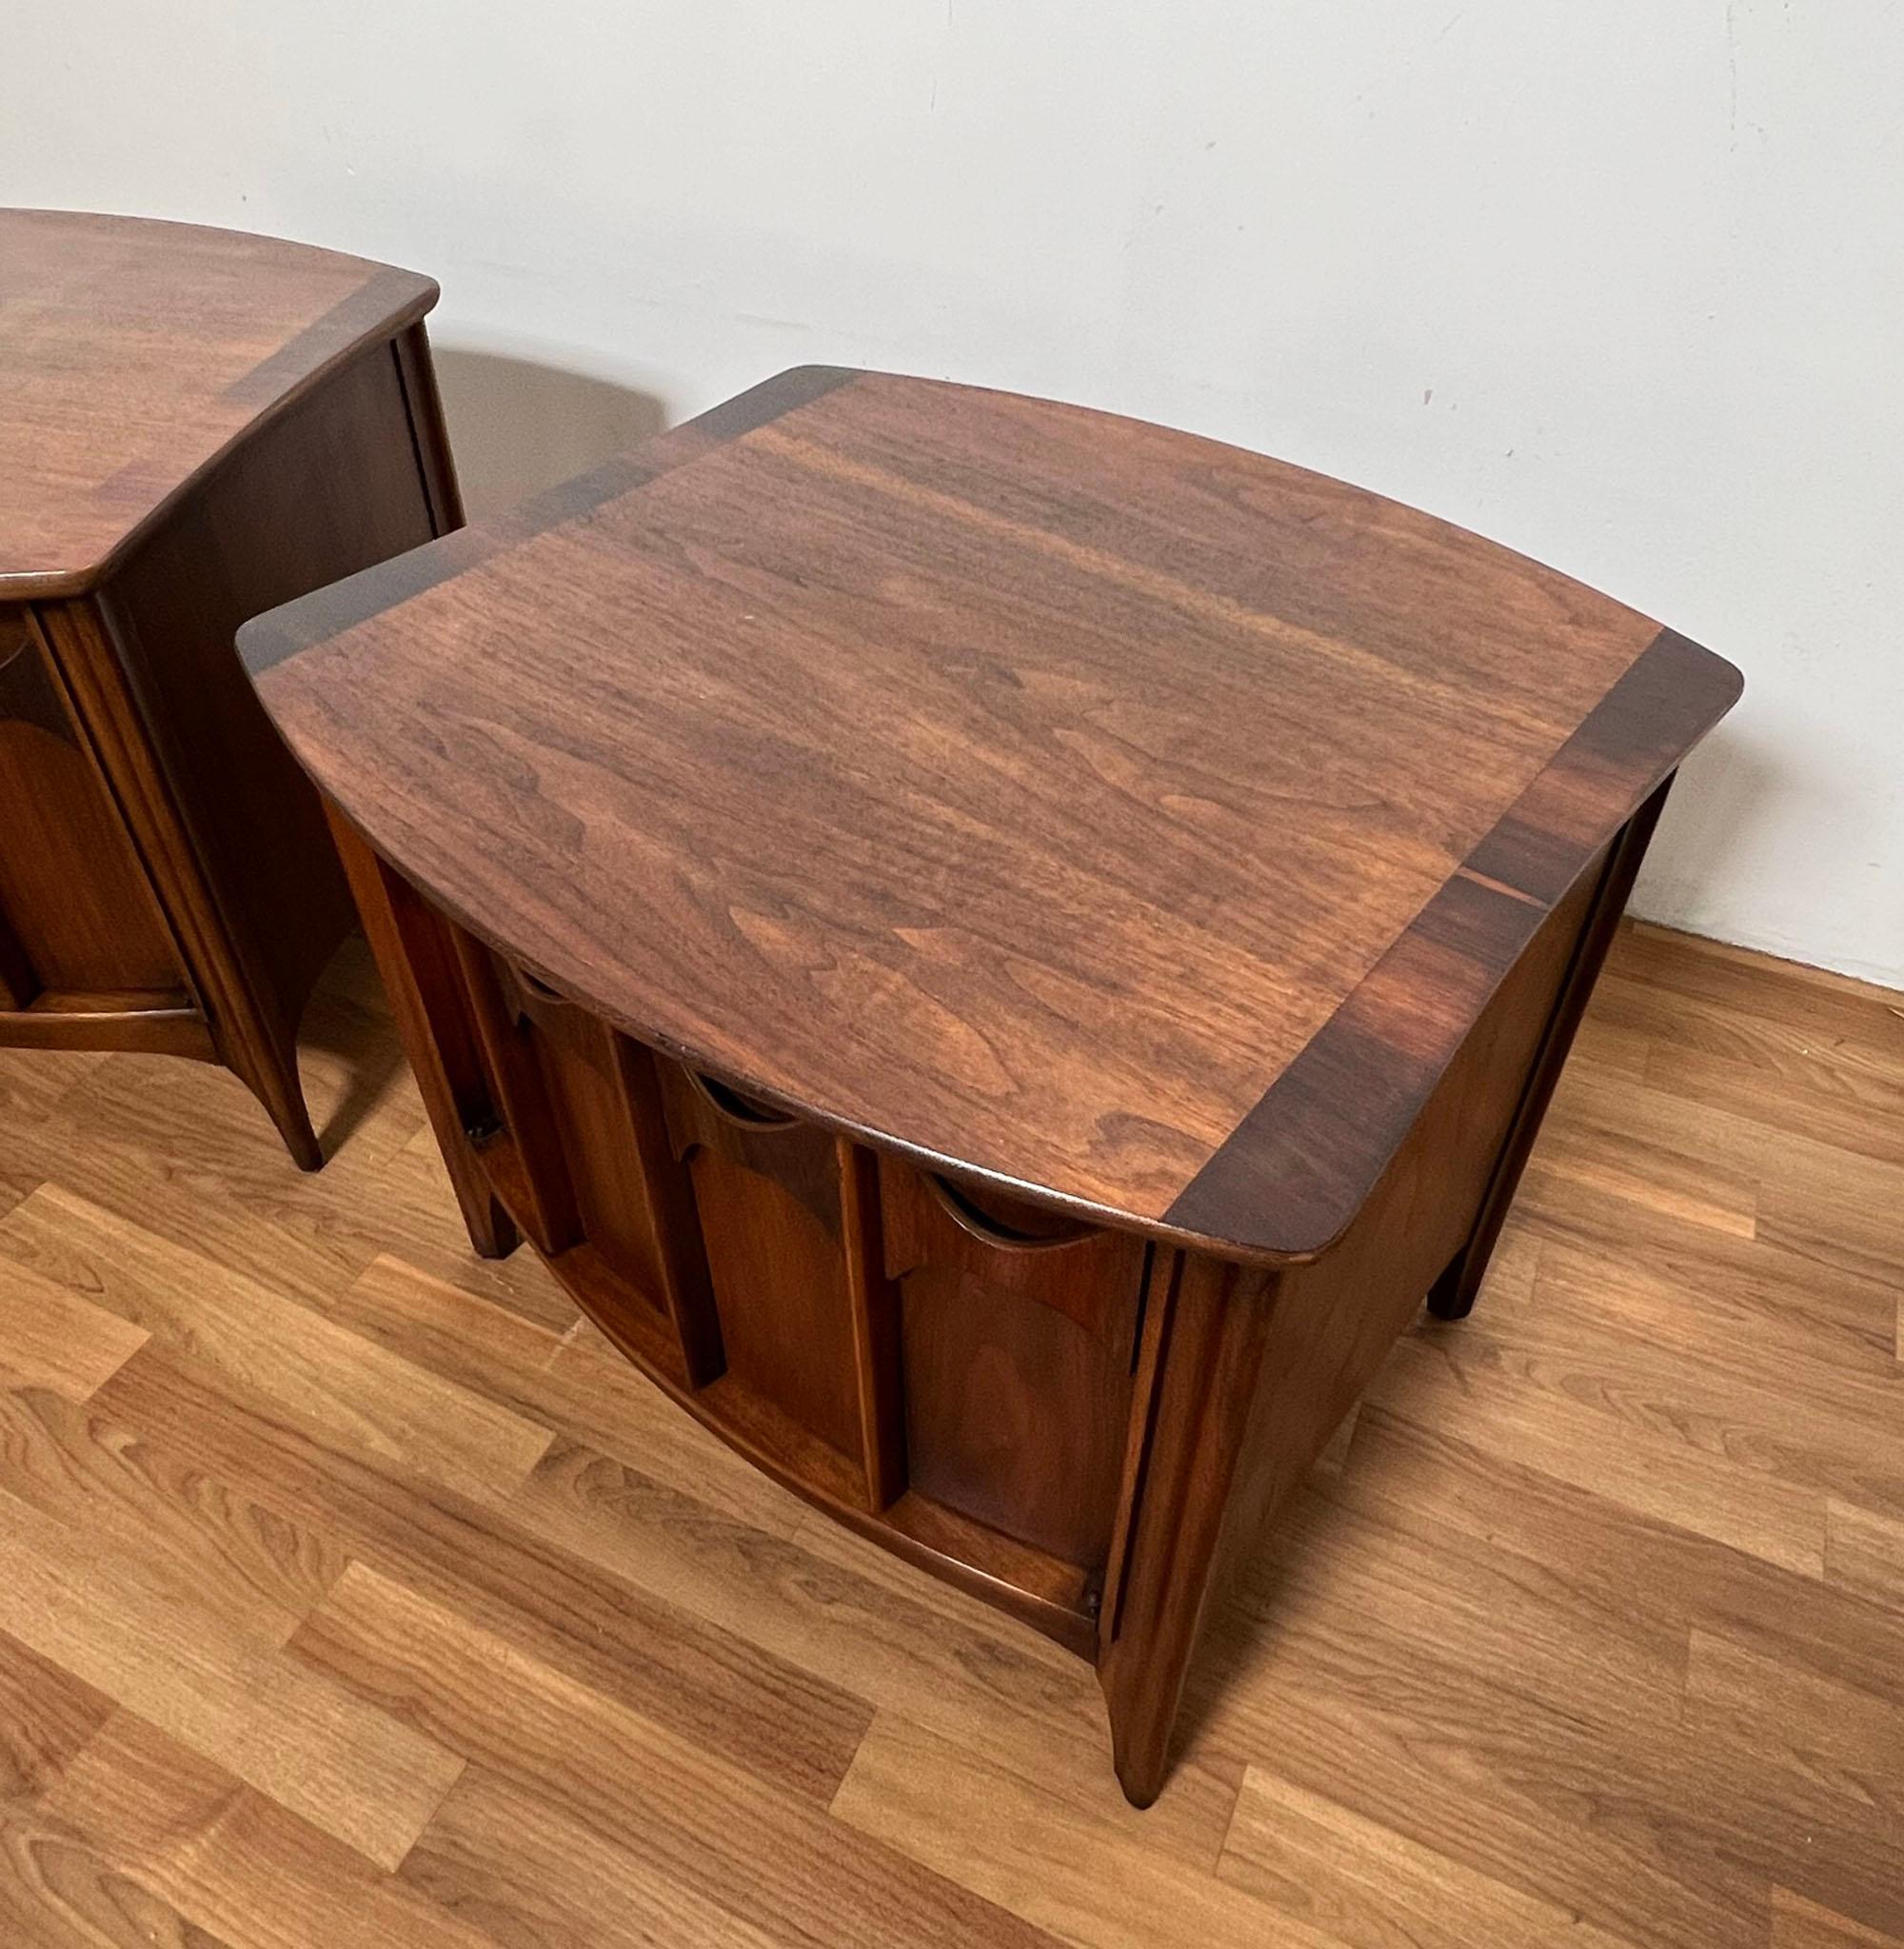 A pair of Kent Coffey end tables with finished backs from their Perspecta line, circa 1960s. Would also make excellent nightstands.